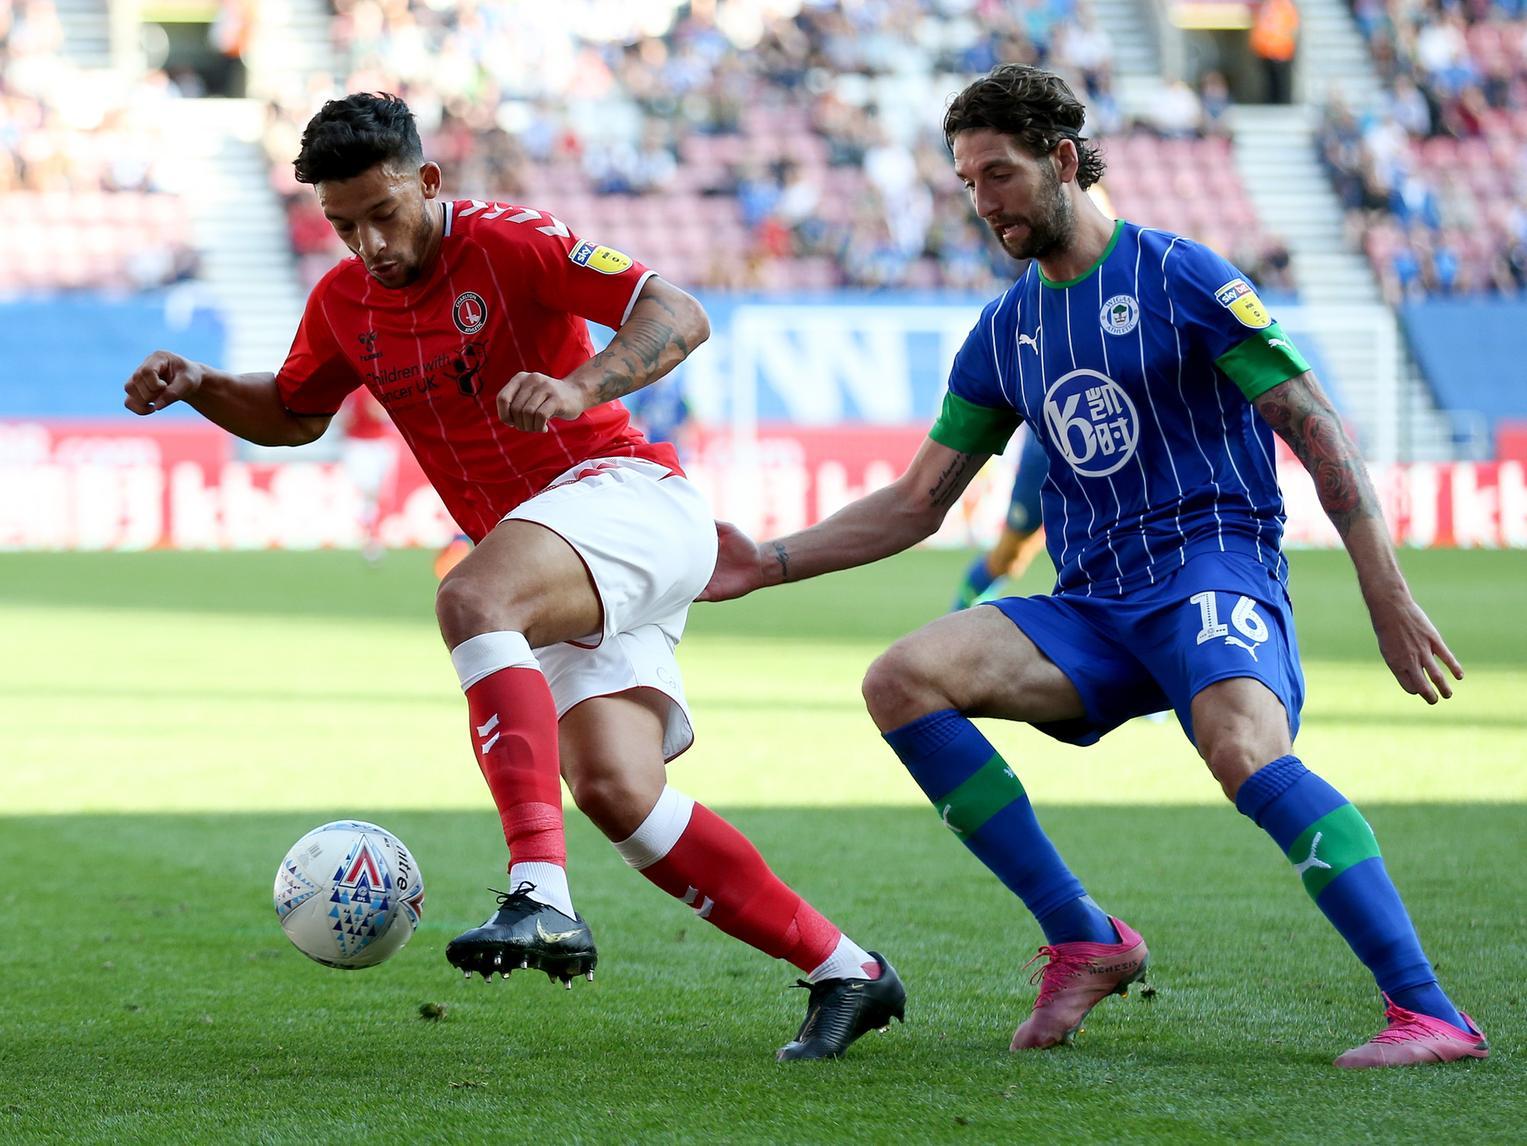 Charlton Athletic striker Macauley Bonne has been forced to withdraw from the Zimbabwenational team for the international break, citing "unforeseen medical grounds" for the decision. (BBC Sport)